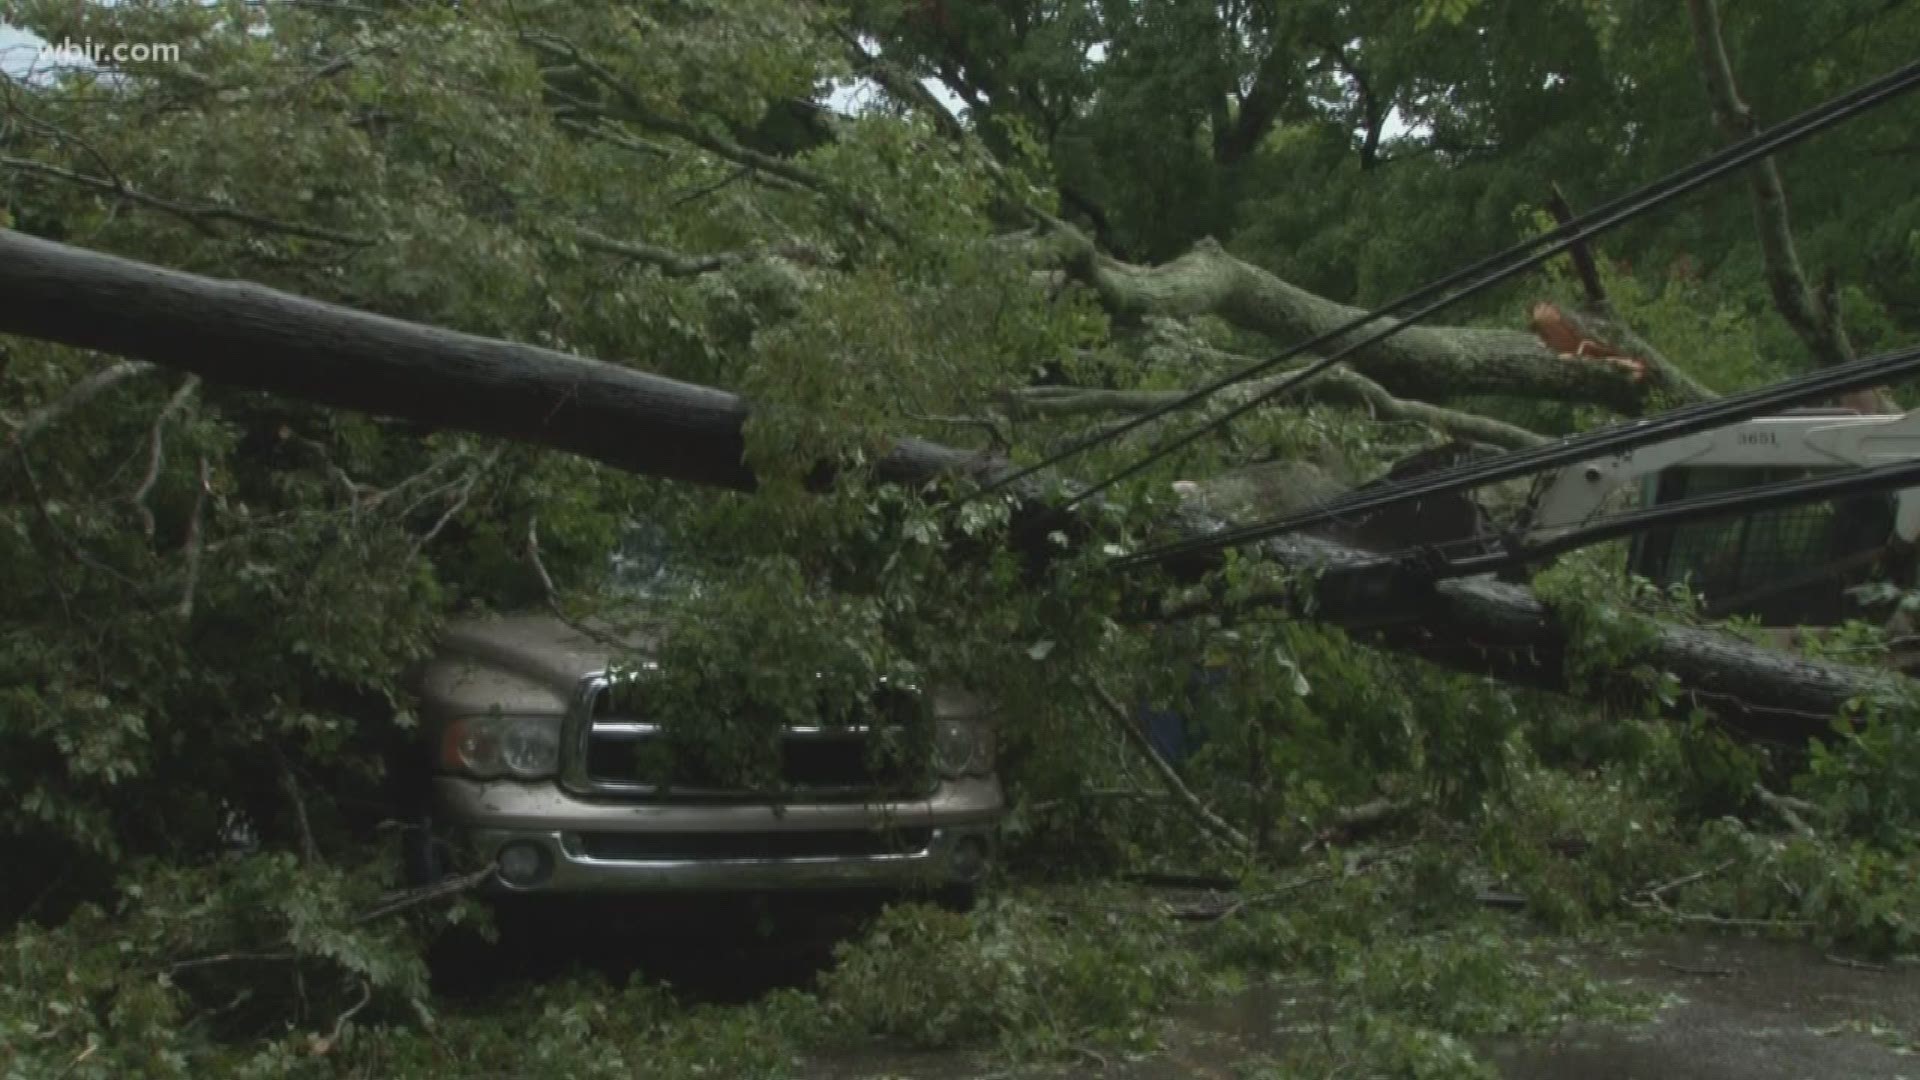 The man was reported to be okay, but was taken to the hospital out of precaution after heavy rain and storms knocked a tree down on his vehicle while he was driving.